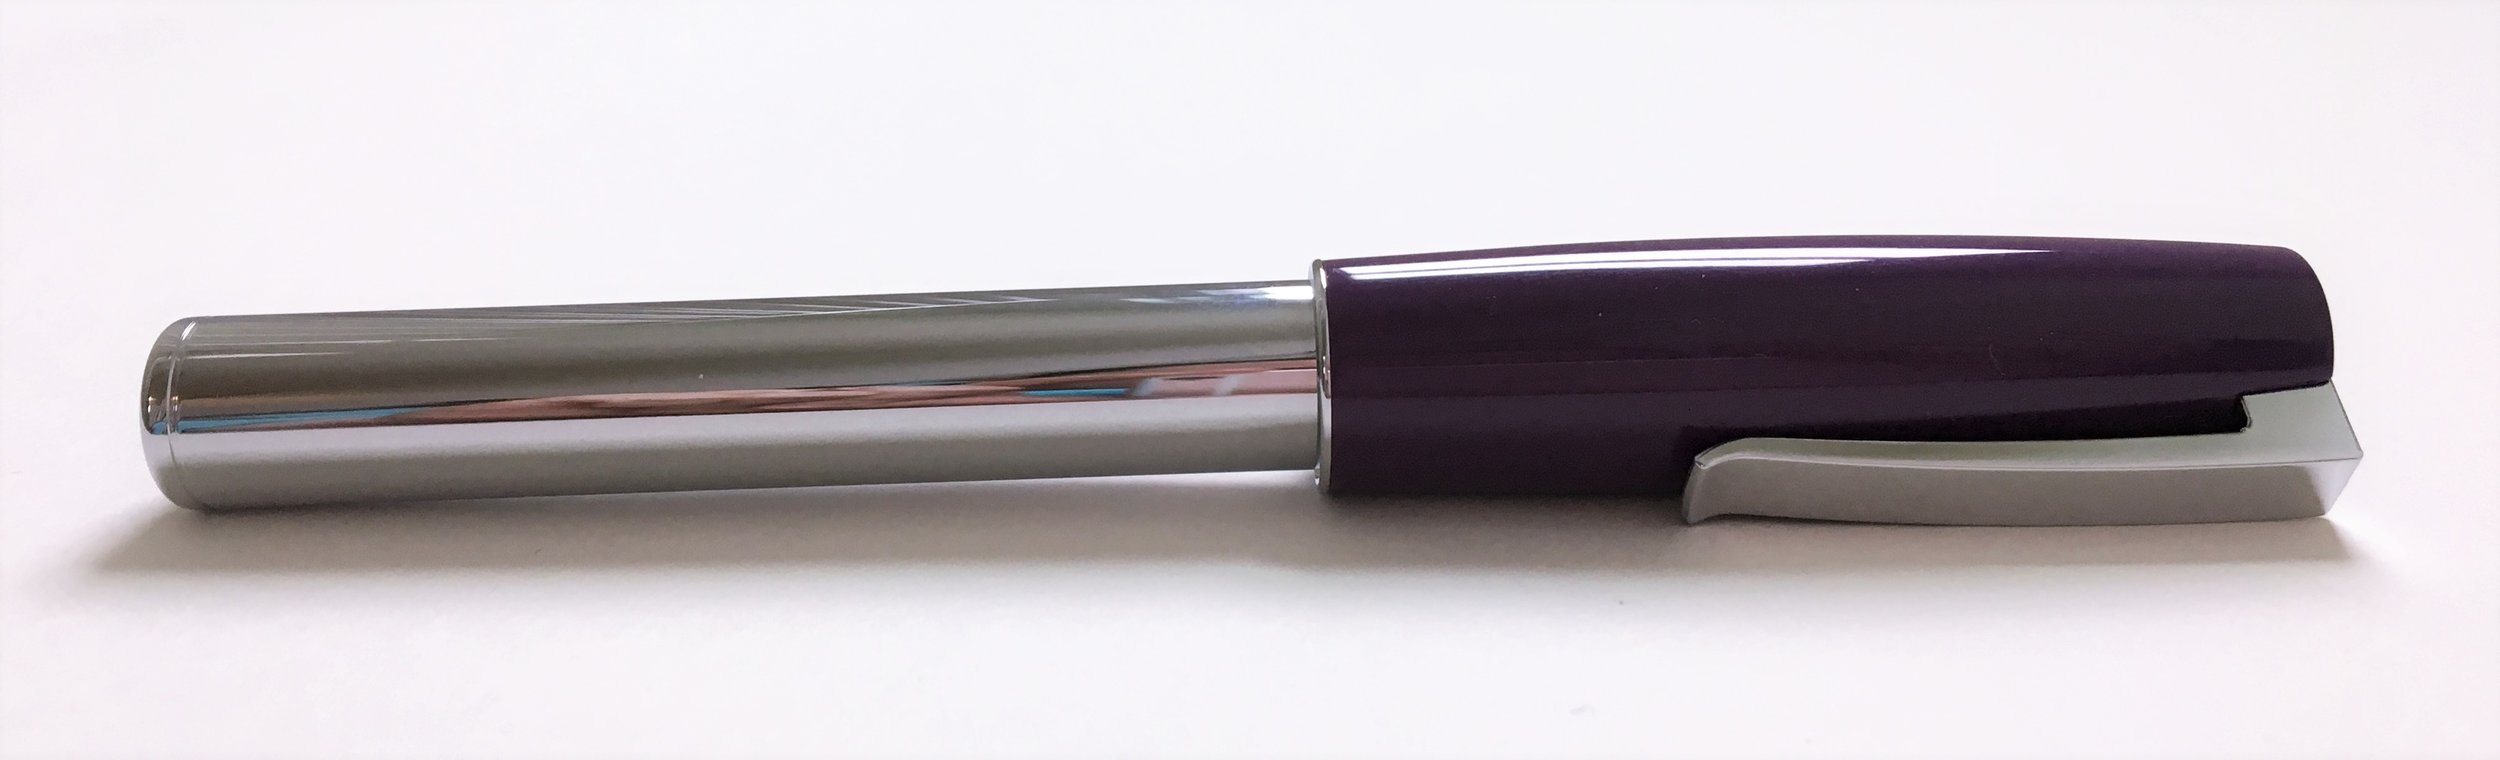 Faber-Castell Loom Fountain Pen Review and Why it's a Good Starter Pen